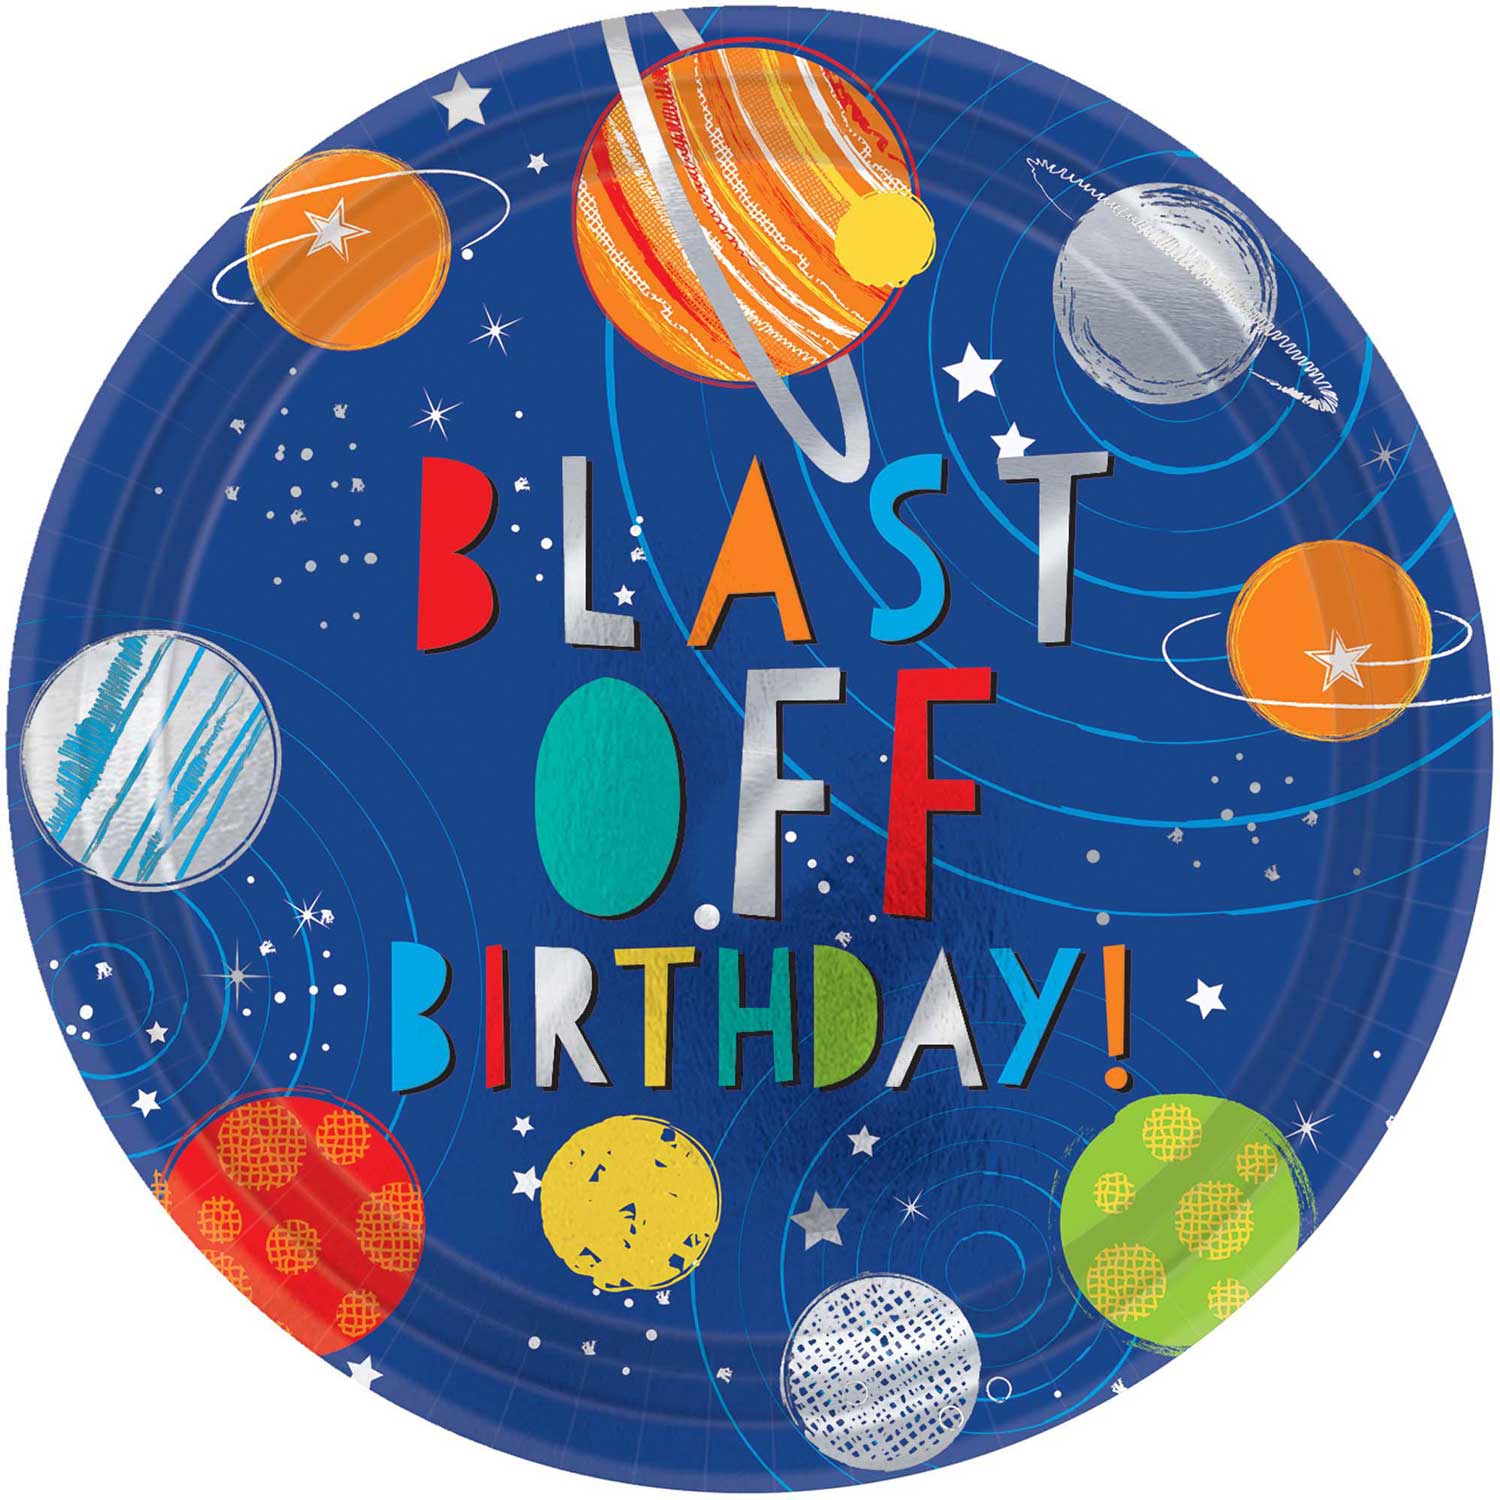 Blast Off Birthday Metallic Paper Plates 10.5in, 8pcs Printed Tableware - Party Centre - Party Centre